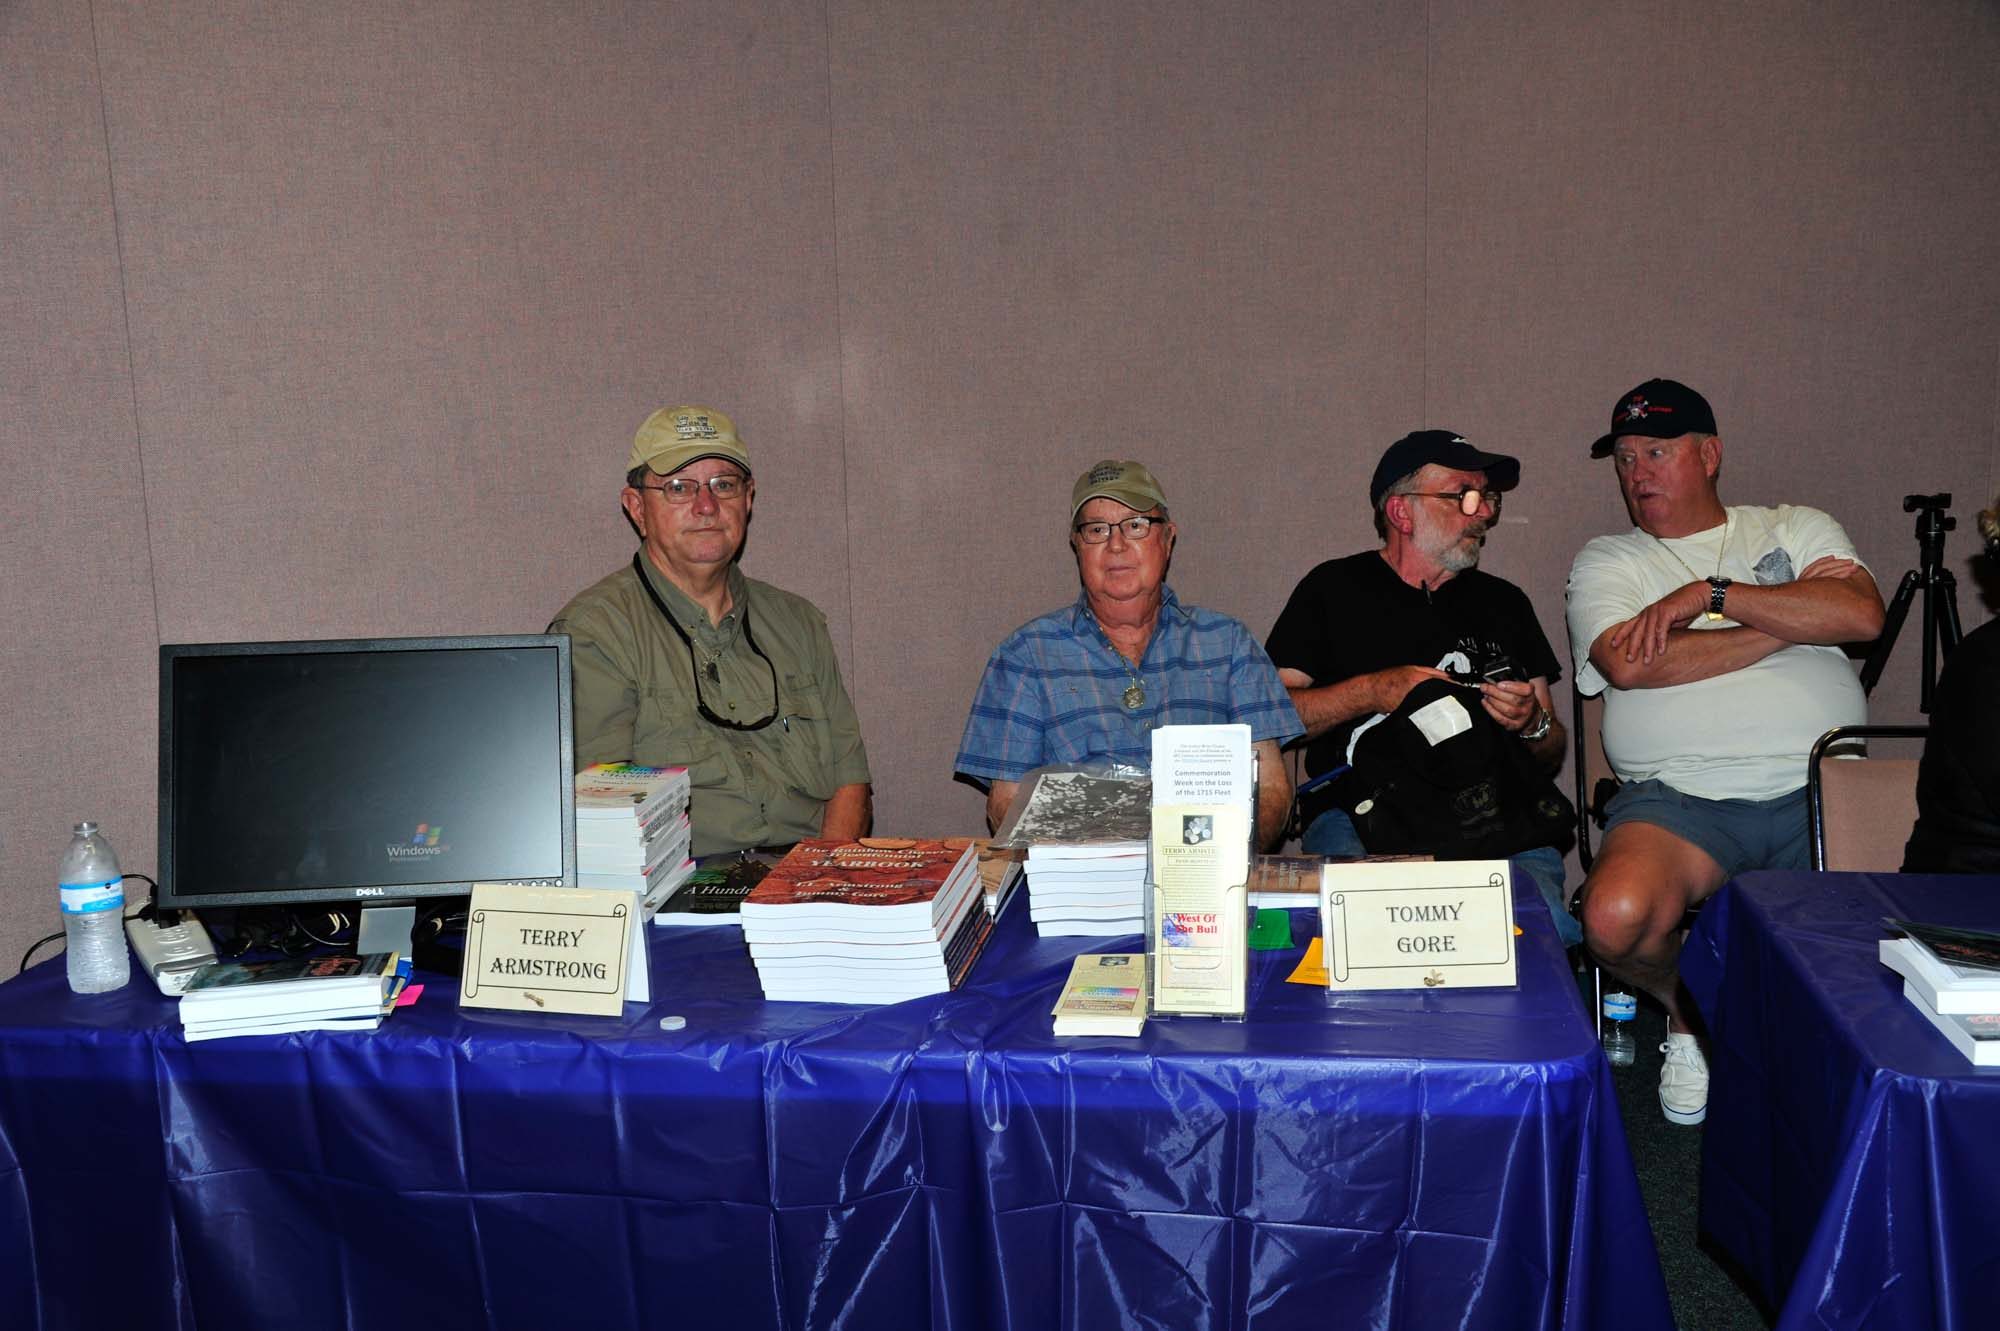 Author Terry Armstrong, Tommy Gore, Bill Diaz and friend